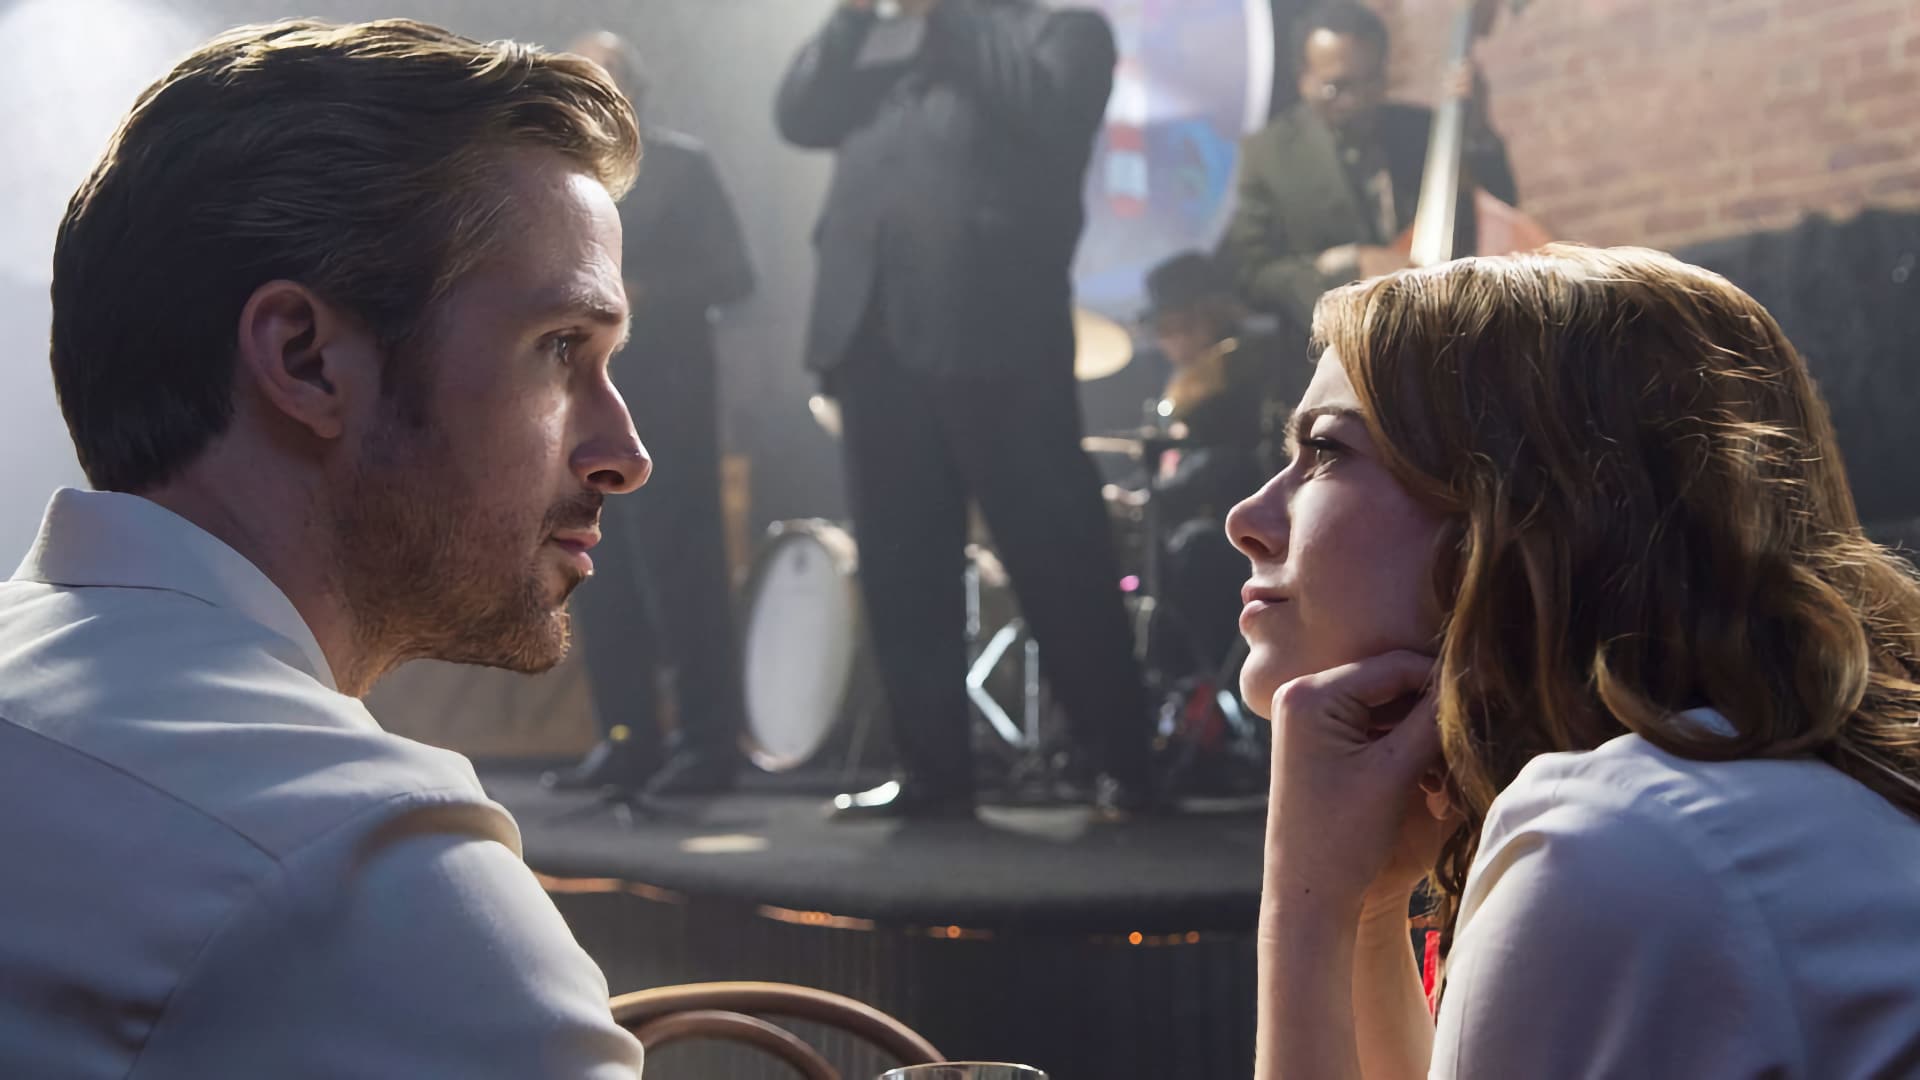 Ryan Gosling and Emma Stone popping out of the background in La La Land. Pic: Lionsgate